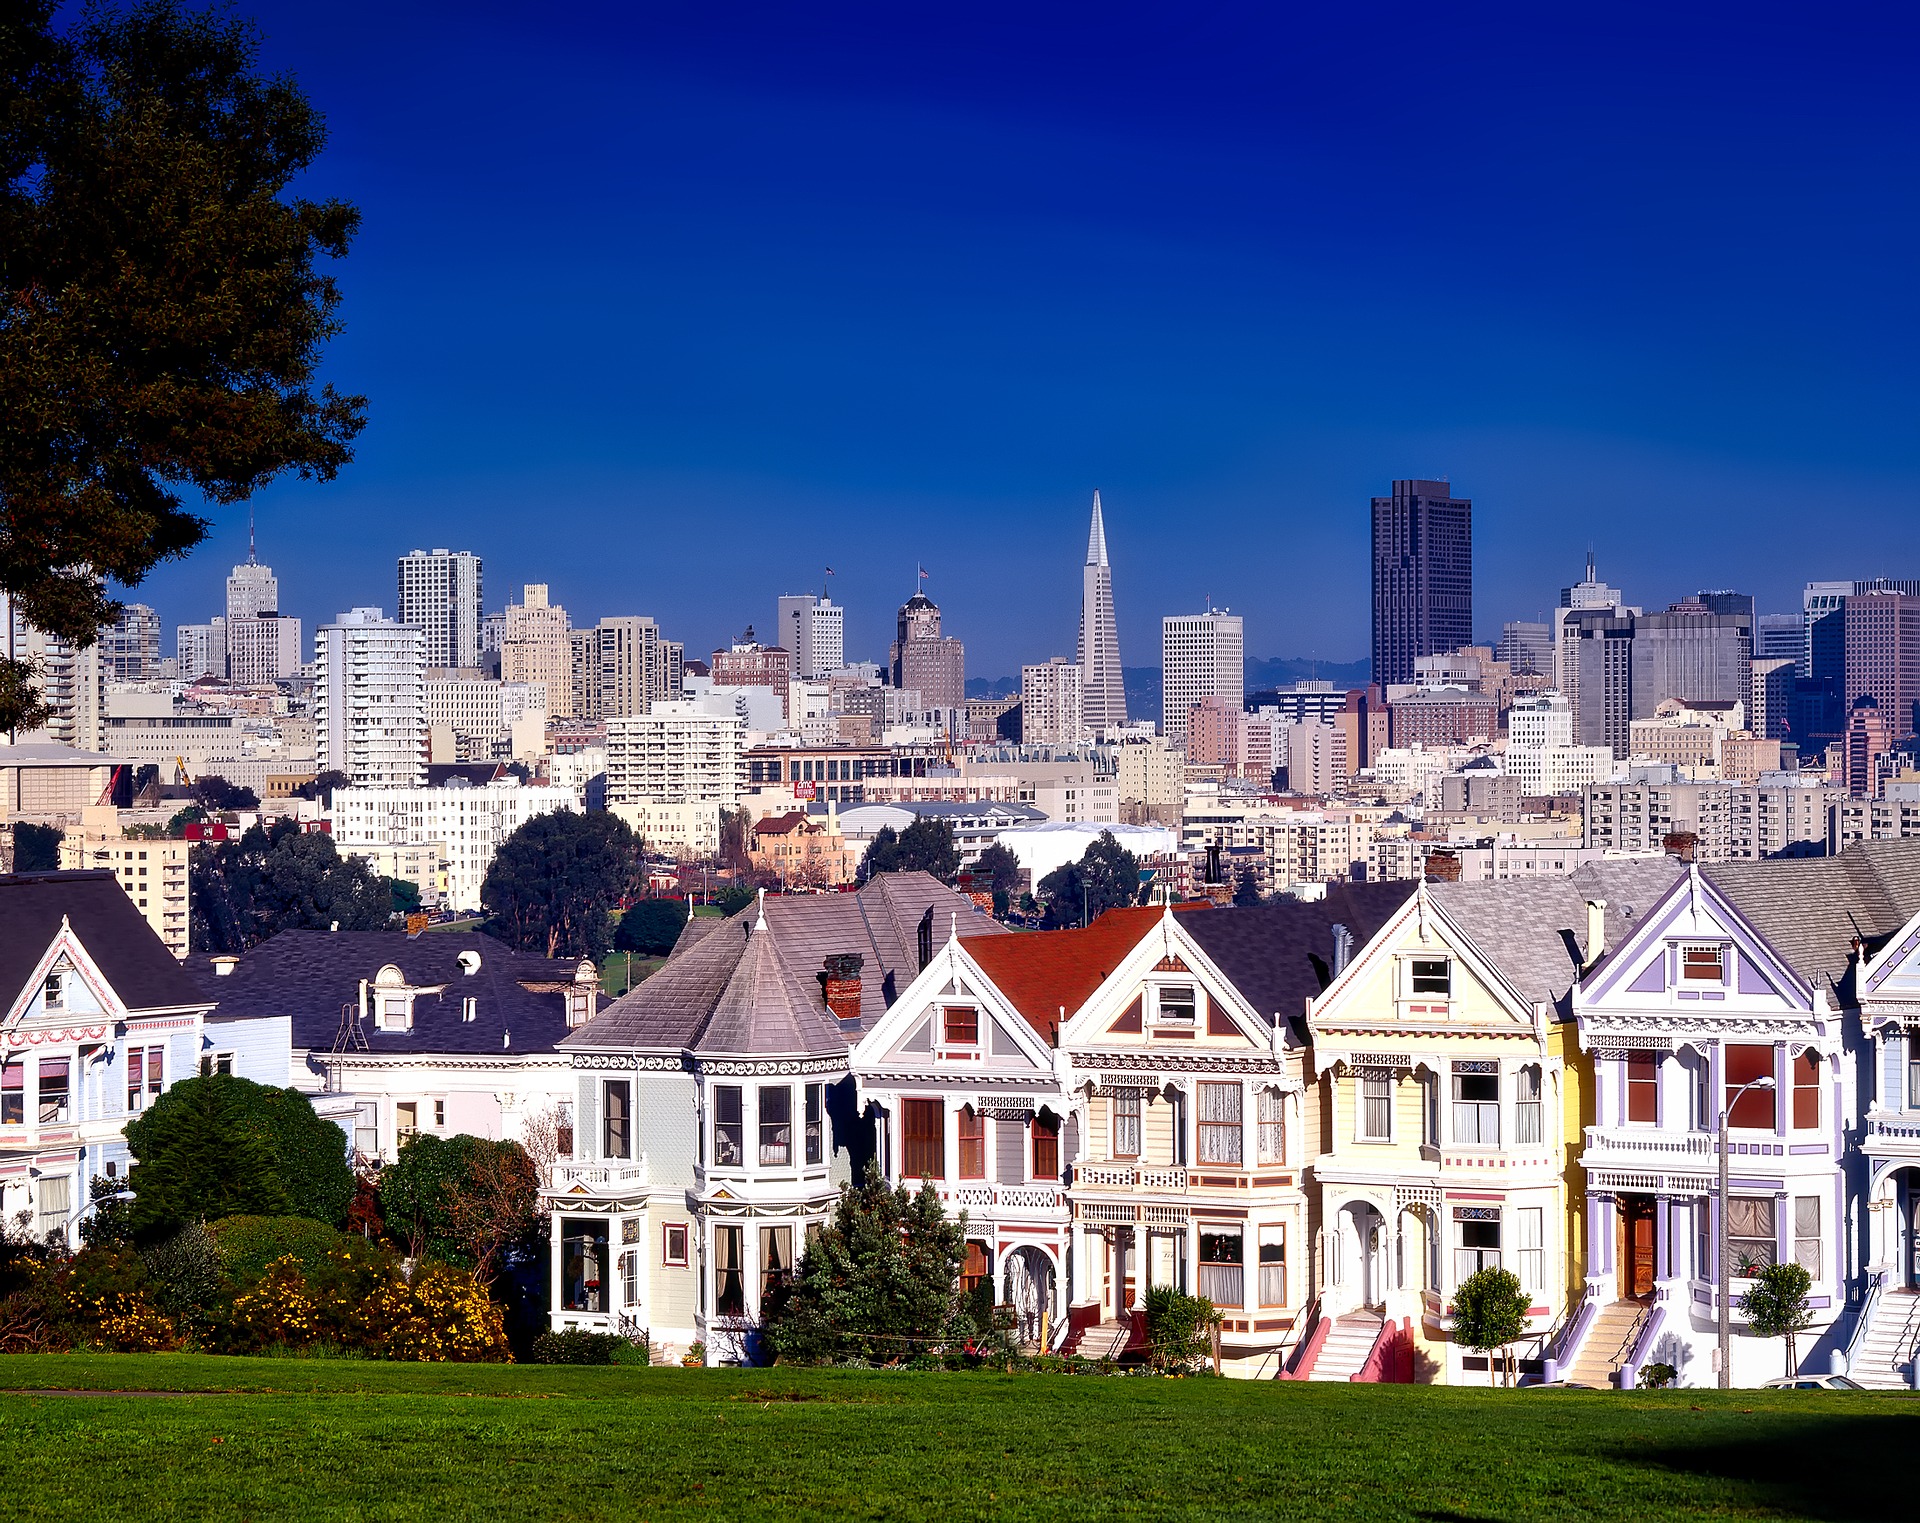 dental practice for sale in san francisco with white houses showing landscape of bay area